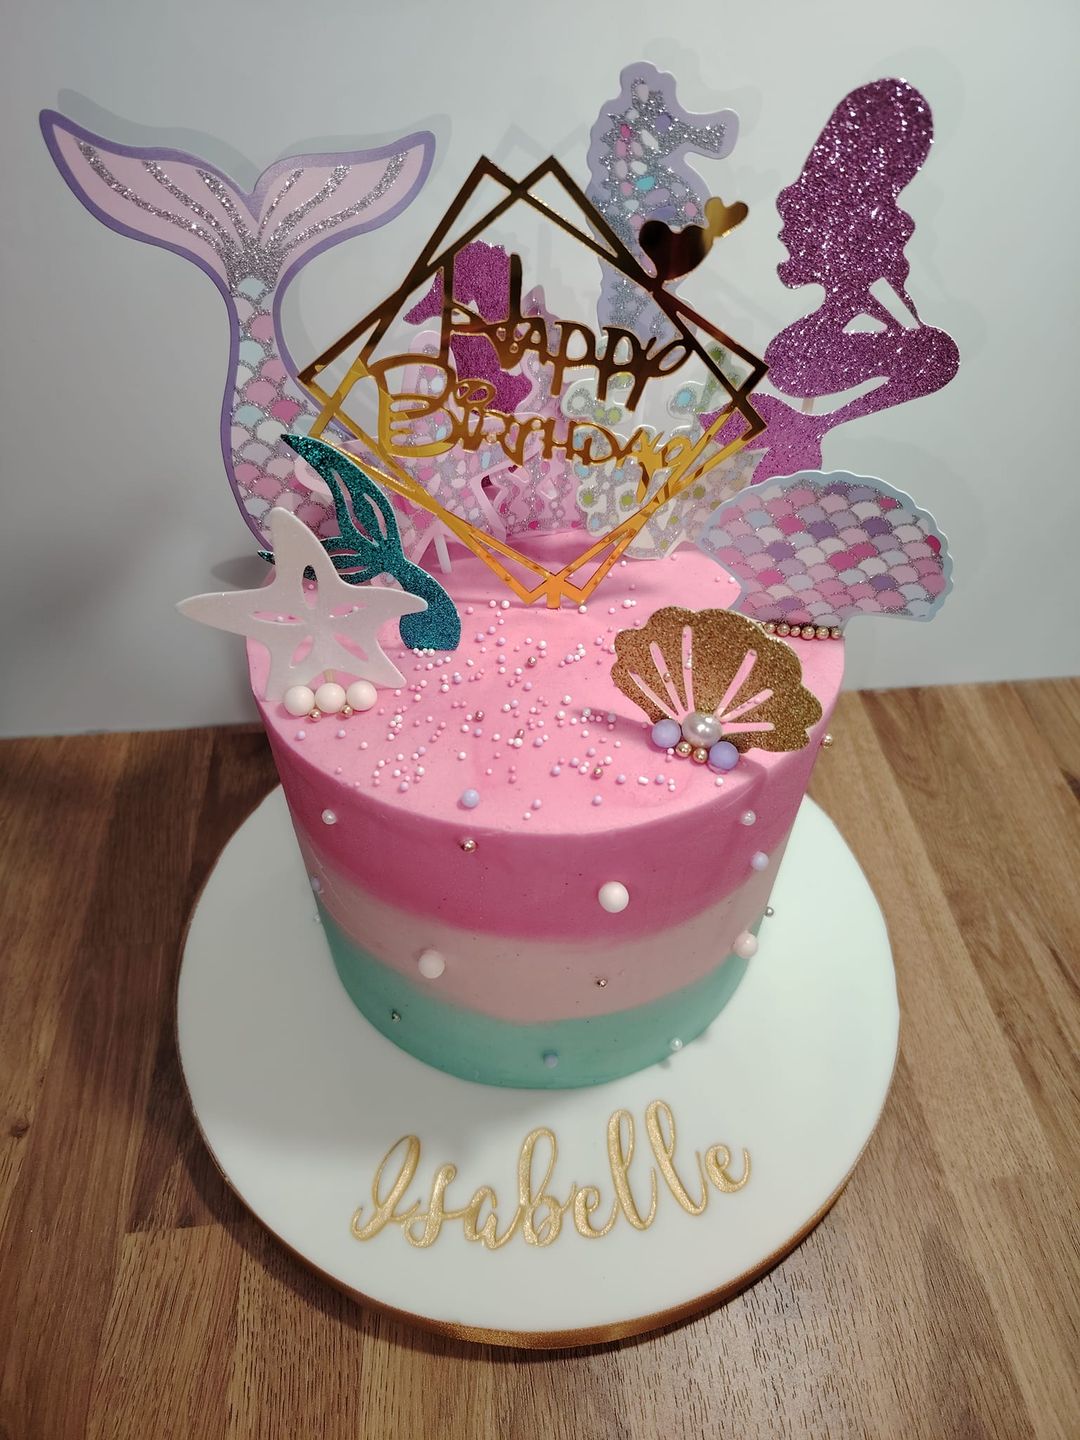 🧜🏻‍♀️🐚🎂 Bring the enchantment of the underwater world to life with these creative and magical cake ideas for an unforgettable celebration